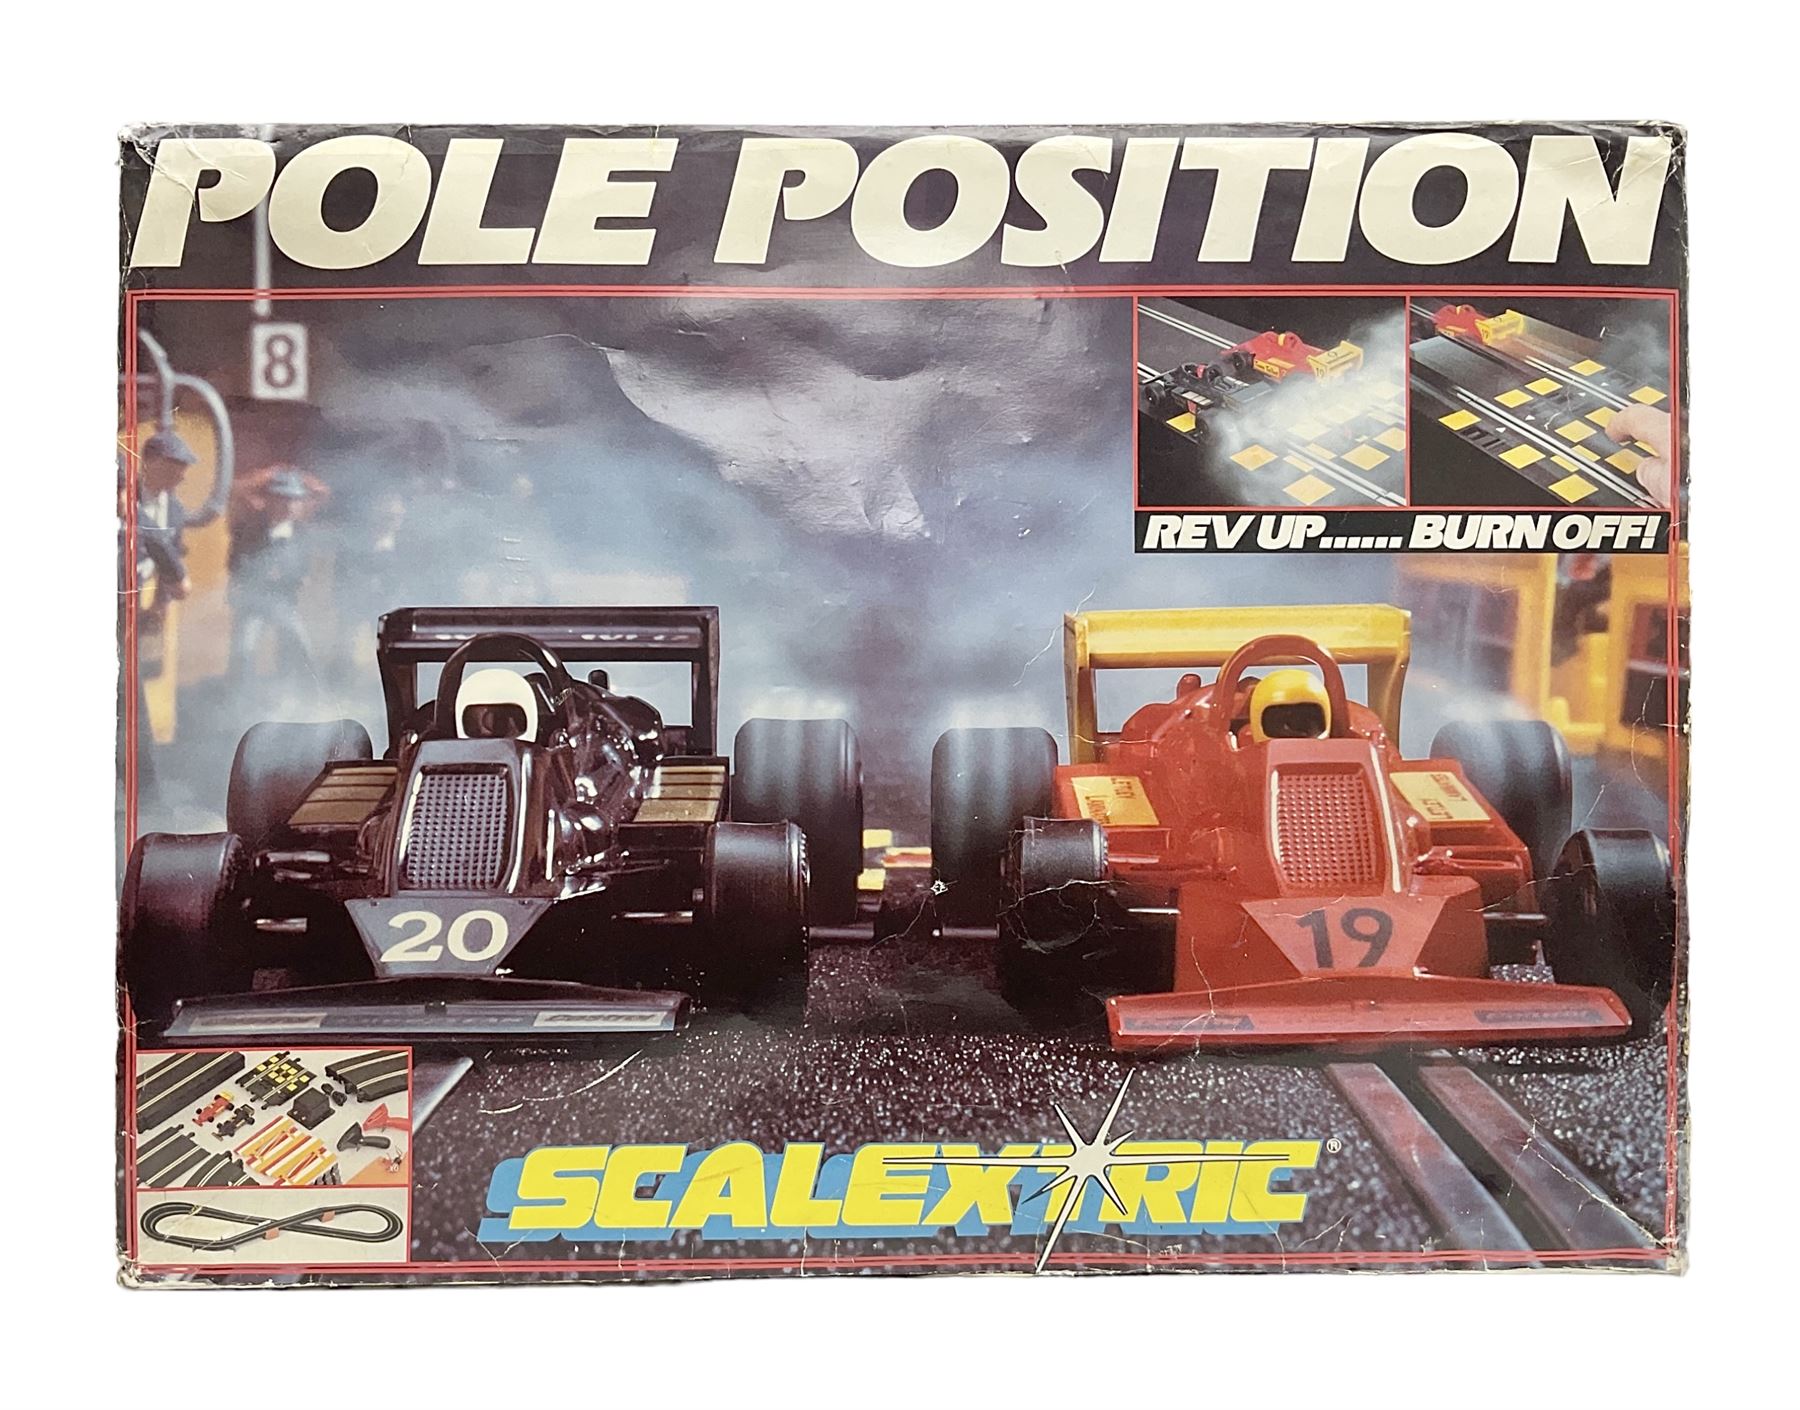 Scalextric - Pole Position set with Team Talbot and Wolf racing cars; boxed with paperwork